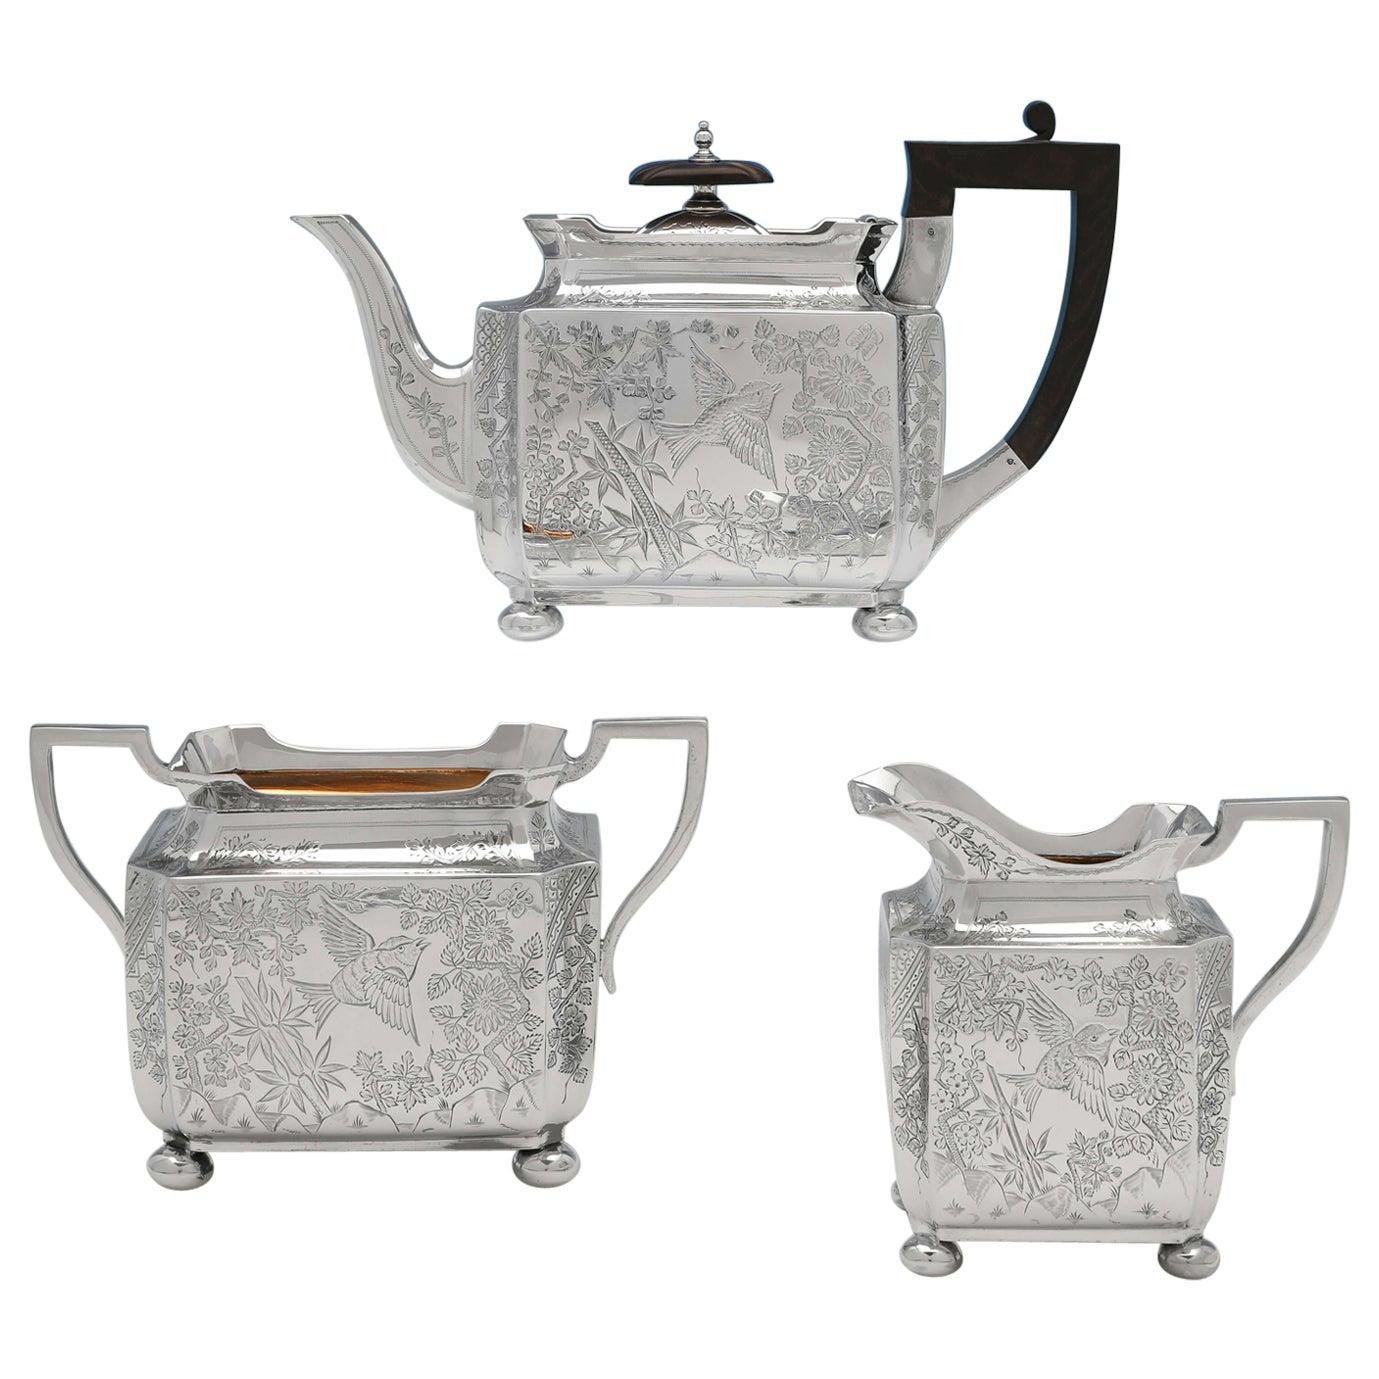 Aesthetic Movement Antique Sterling Silver 3 Piece Tea Set by Walker & Hall 1895